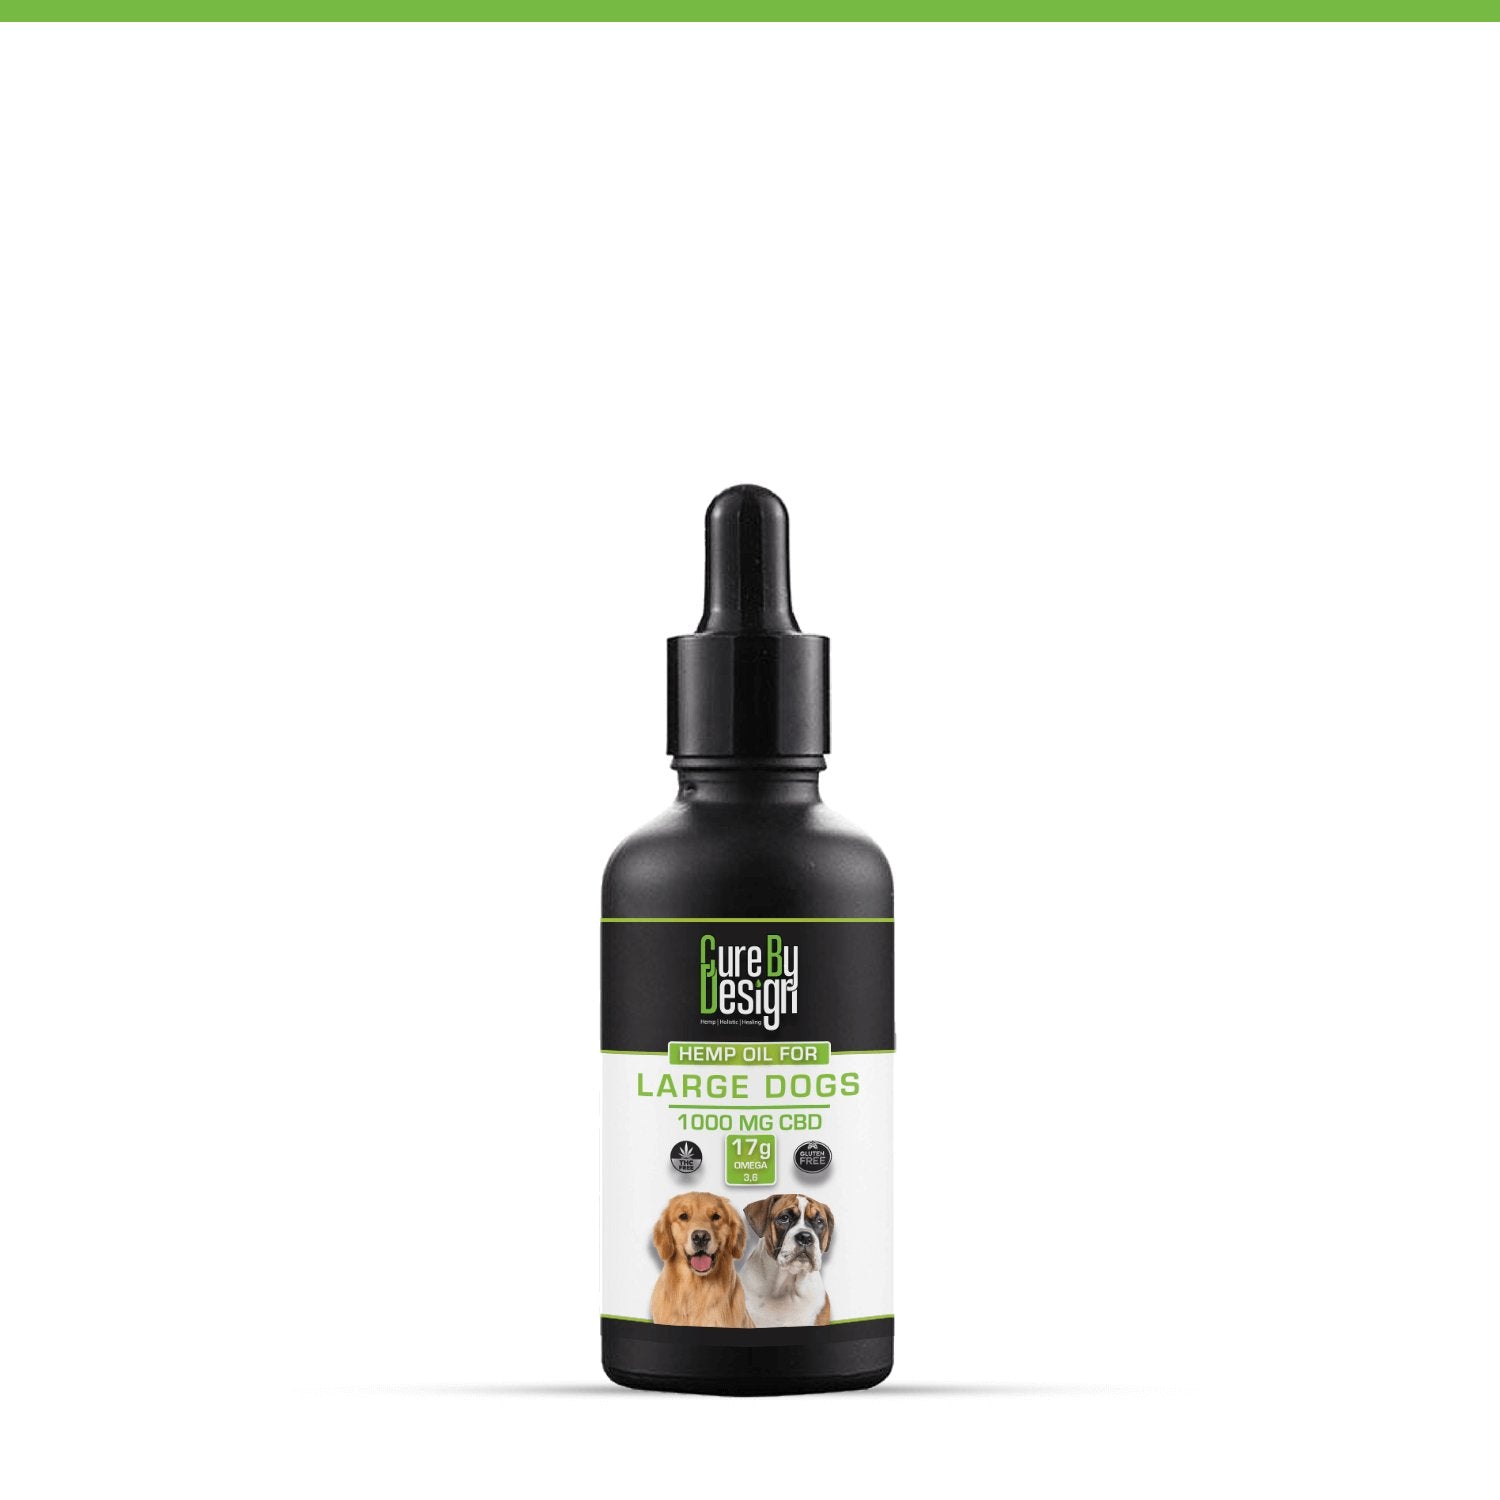 Cure By Design Hemp Oil for Large Dogs 1000mg CBD - CBD Store India